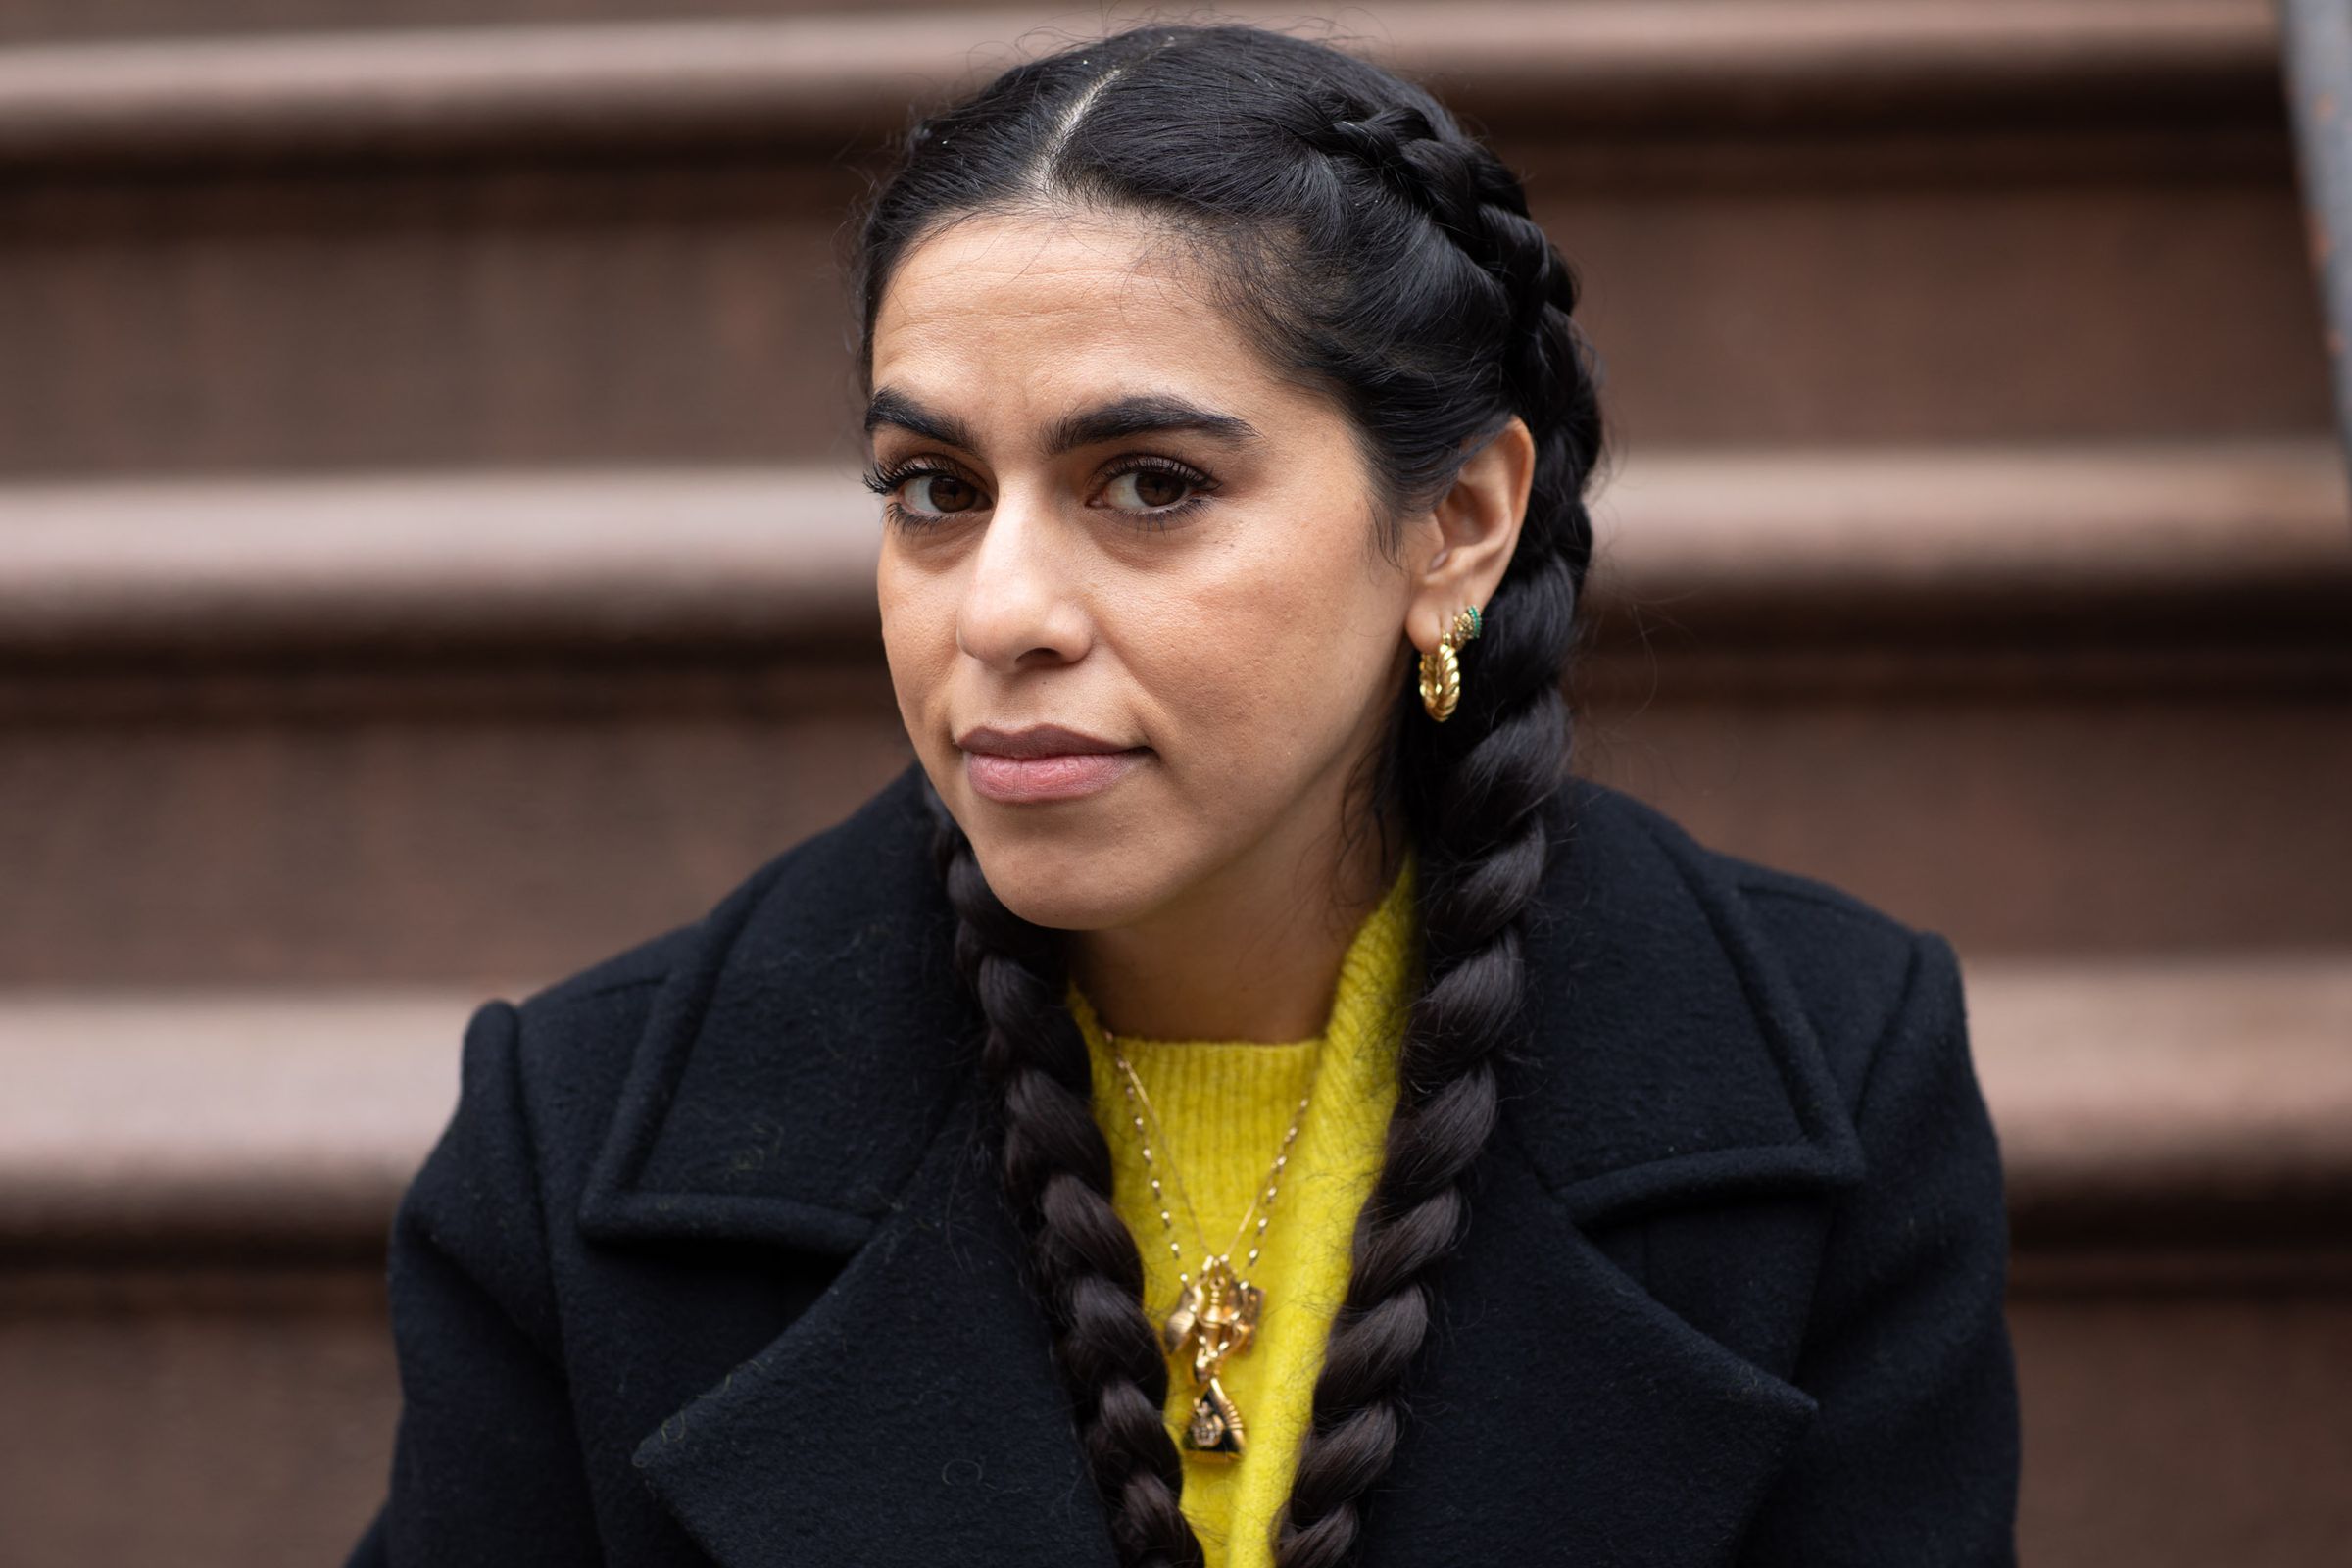 Photo of Mona Chalabi. Her hair is in two braids and she is wearing a black coat and yellow sweater. She is seated on the front steps of her apartment.